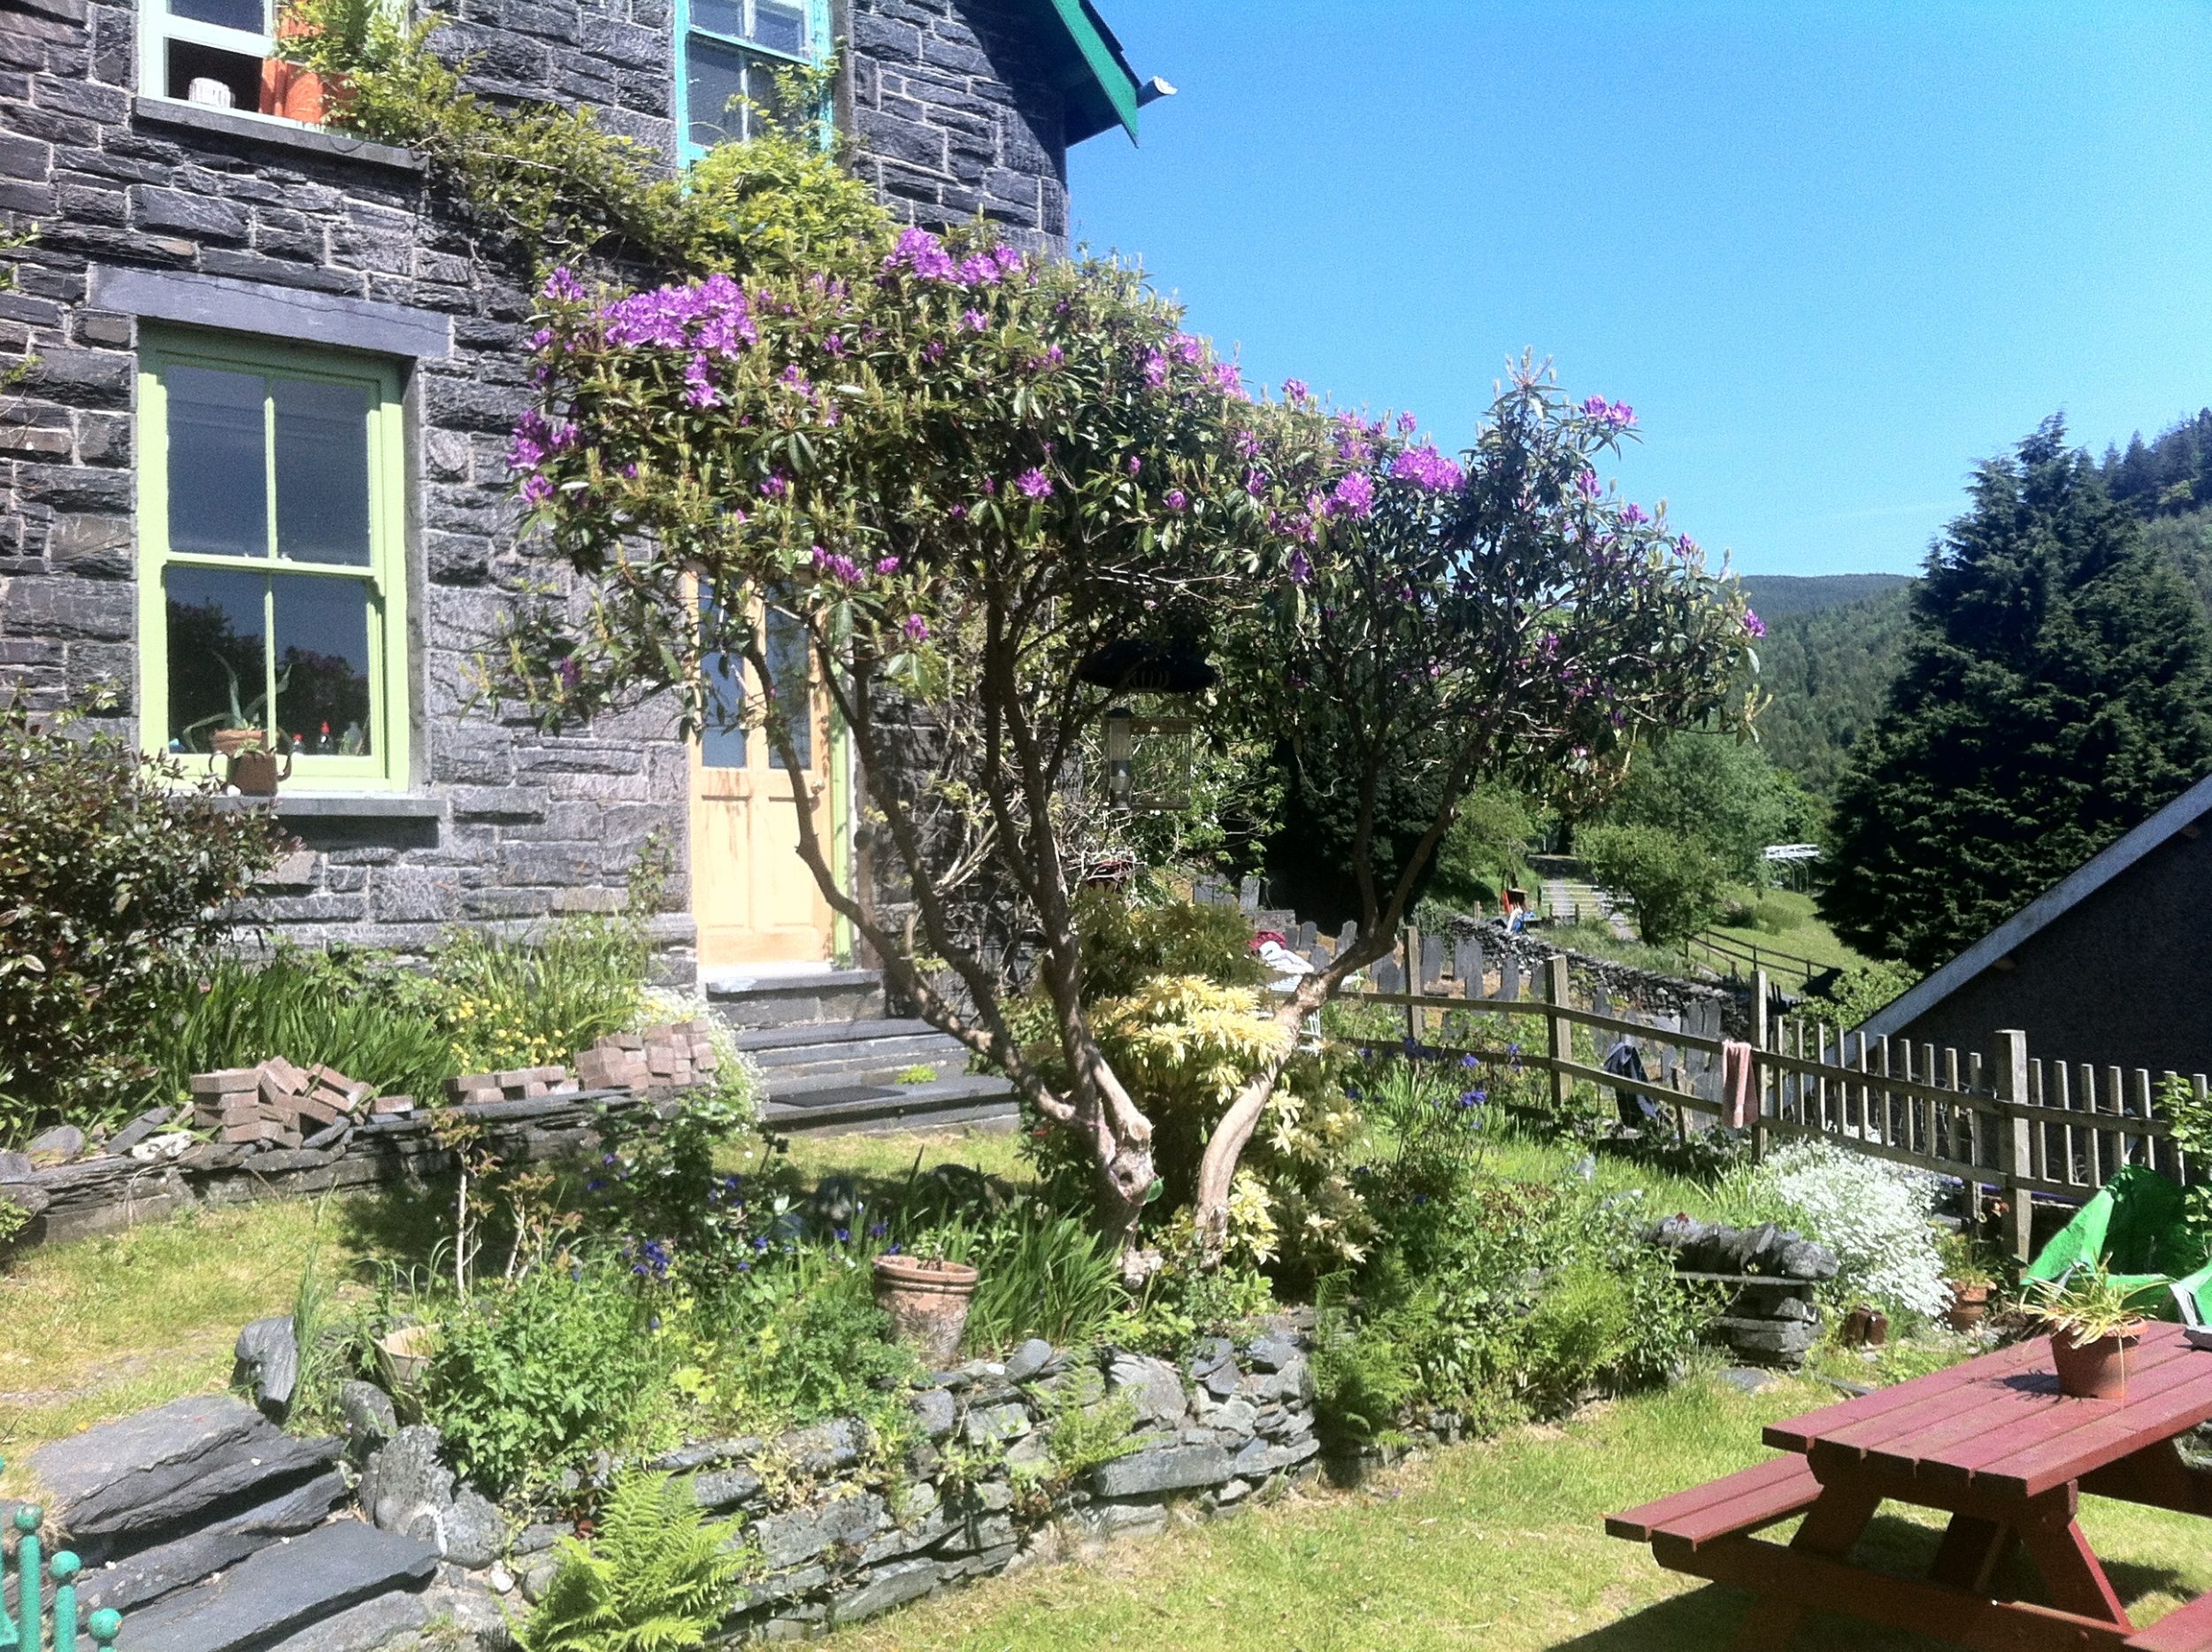 The exterior of corris hostel is very pretty and full of fresh flowers